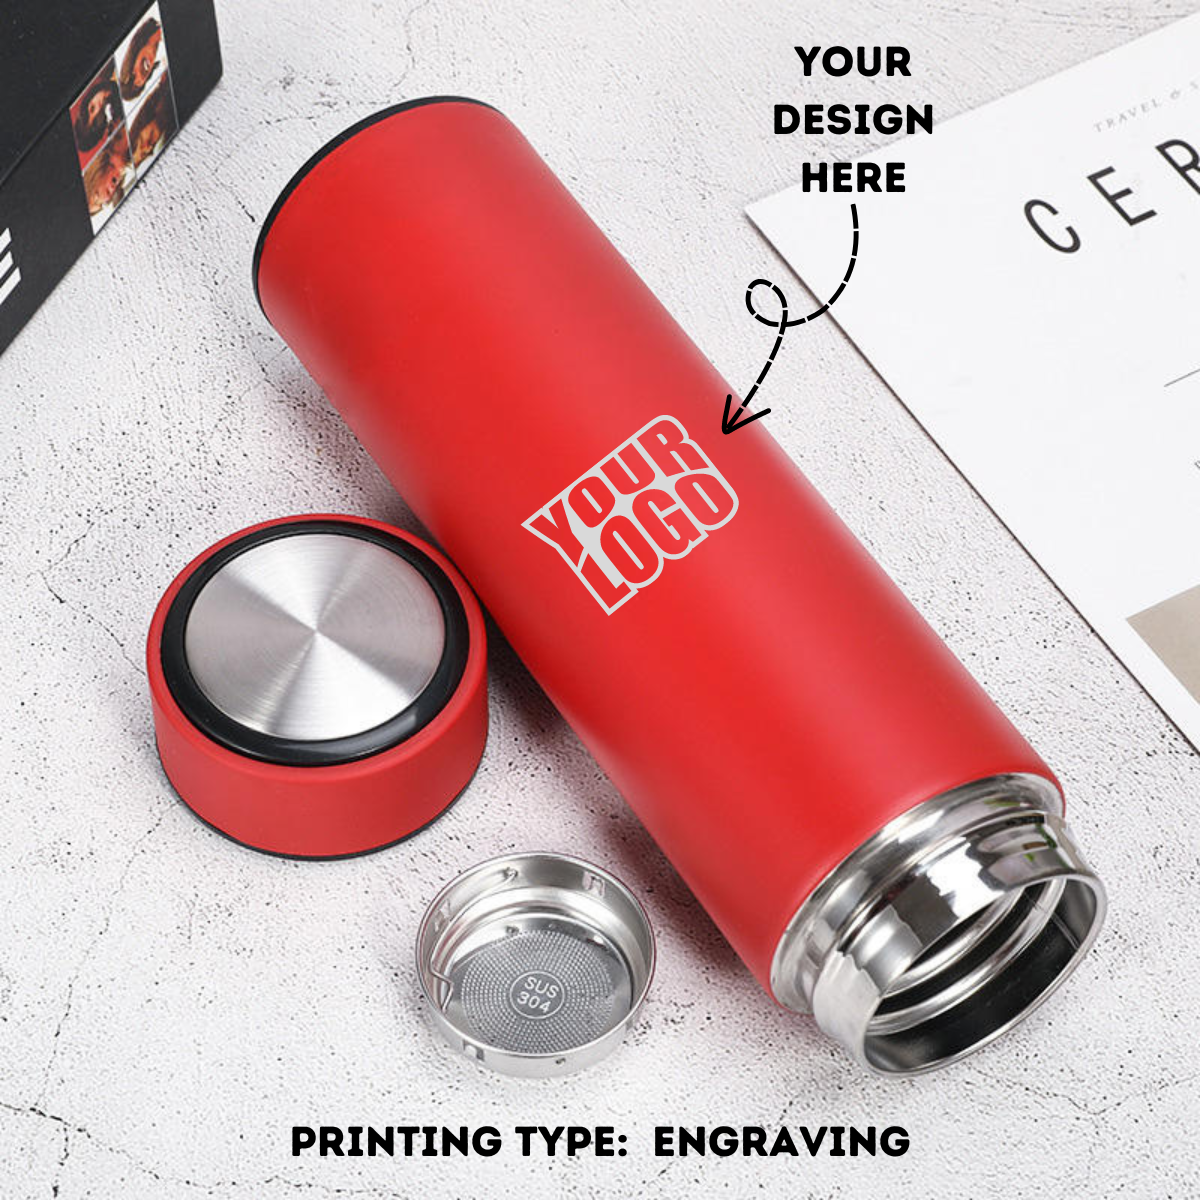 Personalized Red Non-Temperature Insulated Steel Water Bottle Laser Engraved - 500ml - For Return Gift, Corporate Gifting, Office or Personal Use